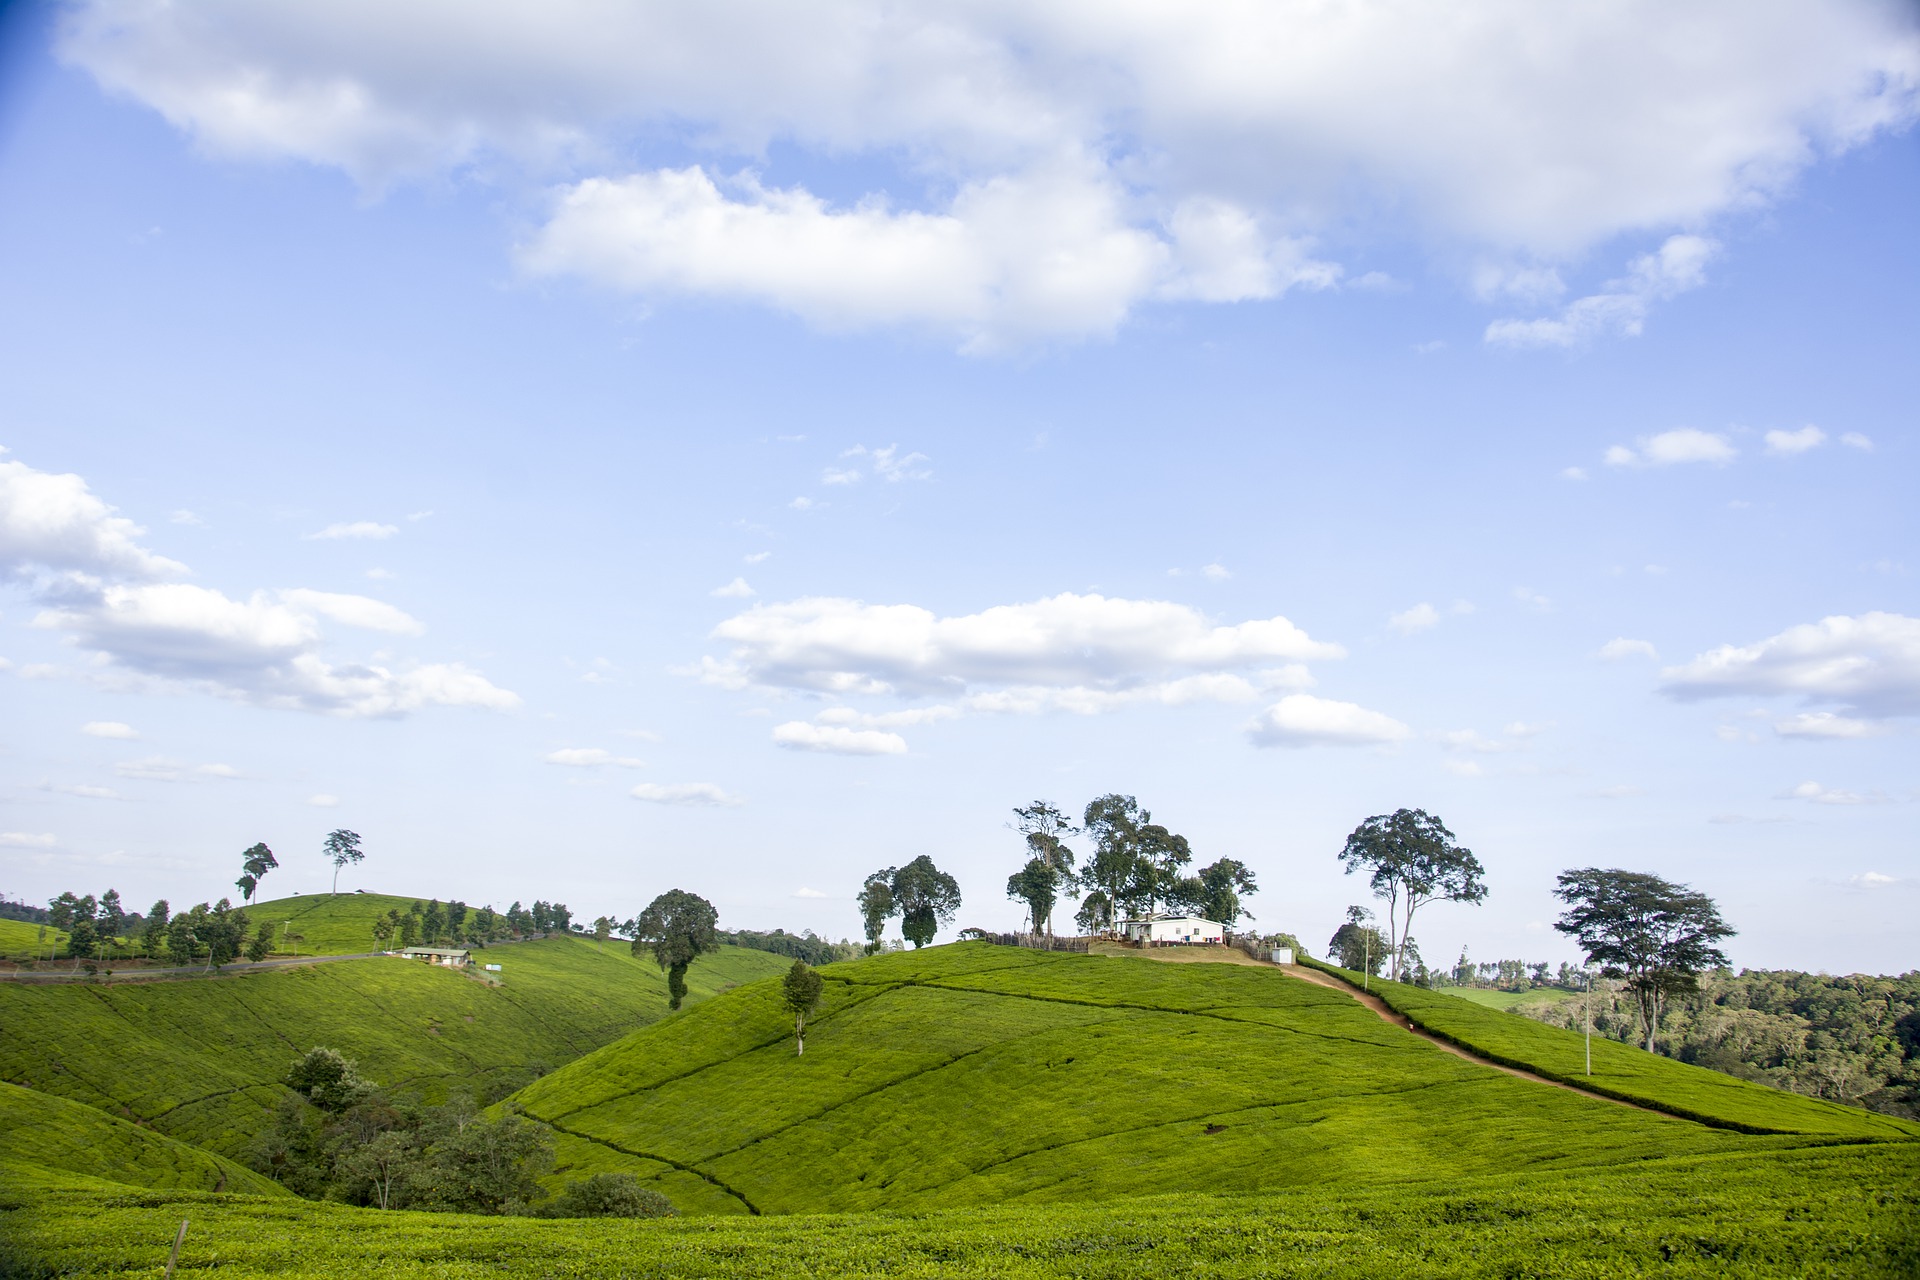 Agriculture: the basis of the Rwandan economy